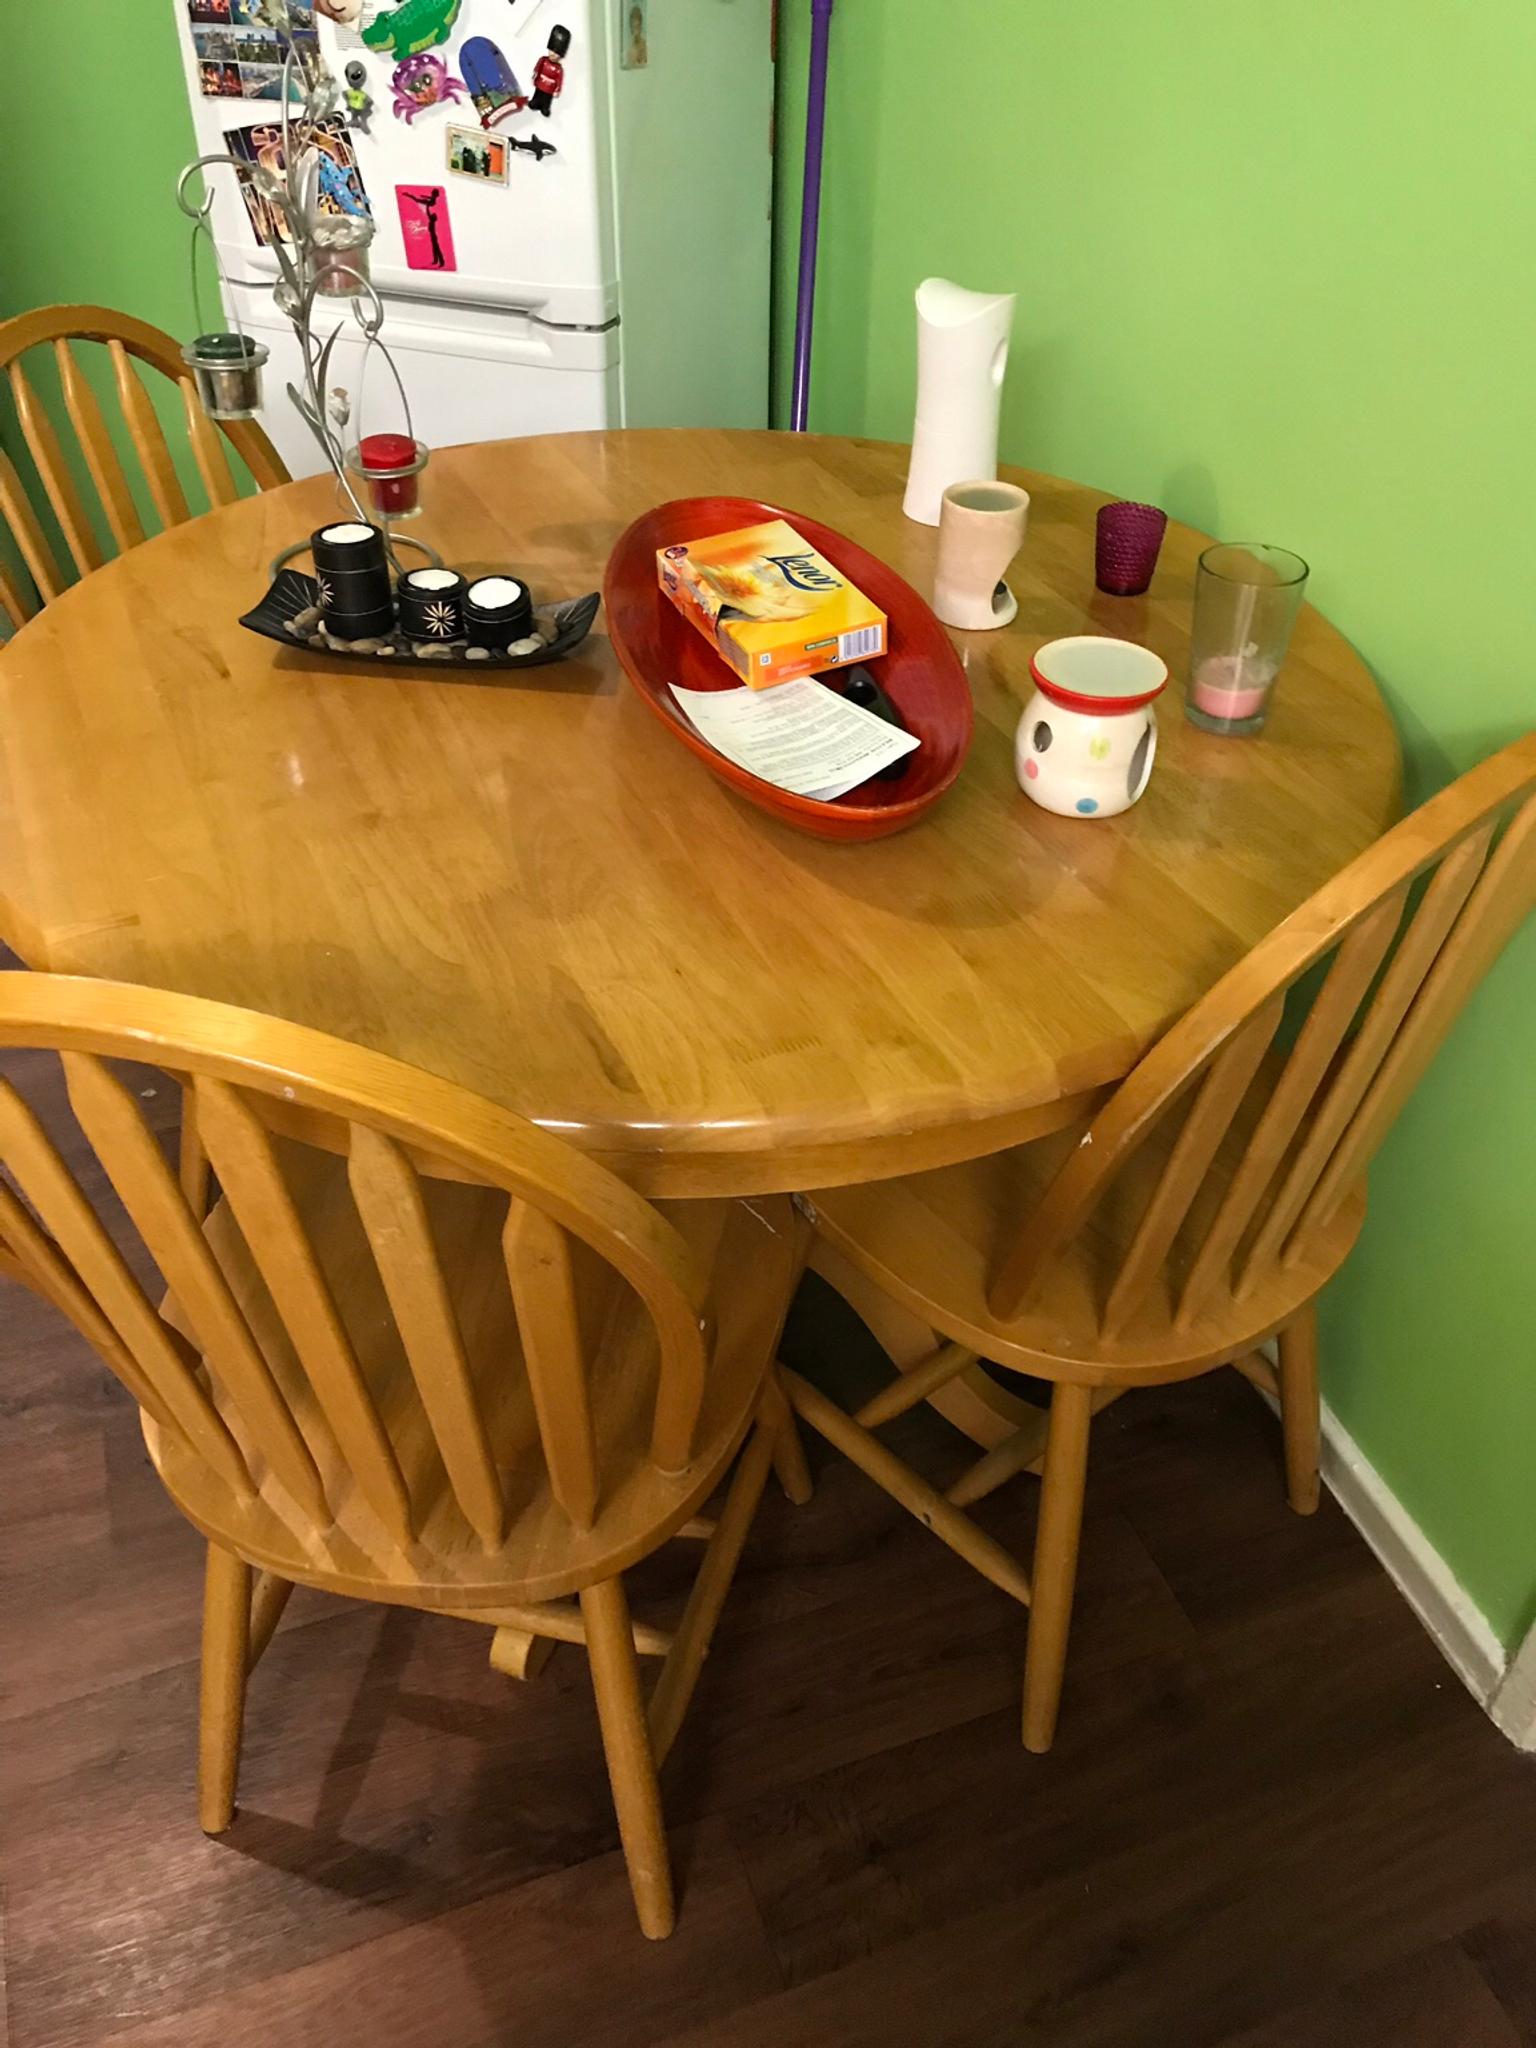 Round Dining Table With 3 Chairs In Leeds For 35 00 For Sale Shpock